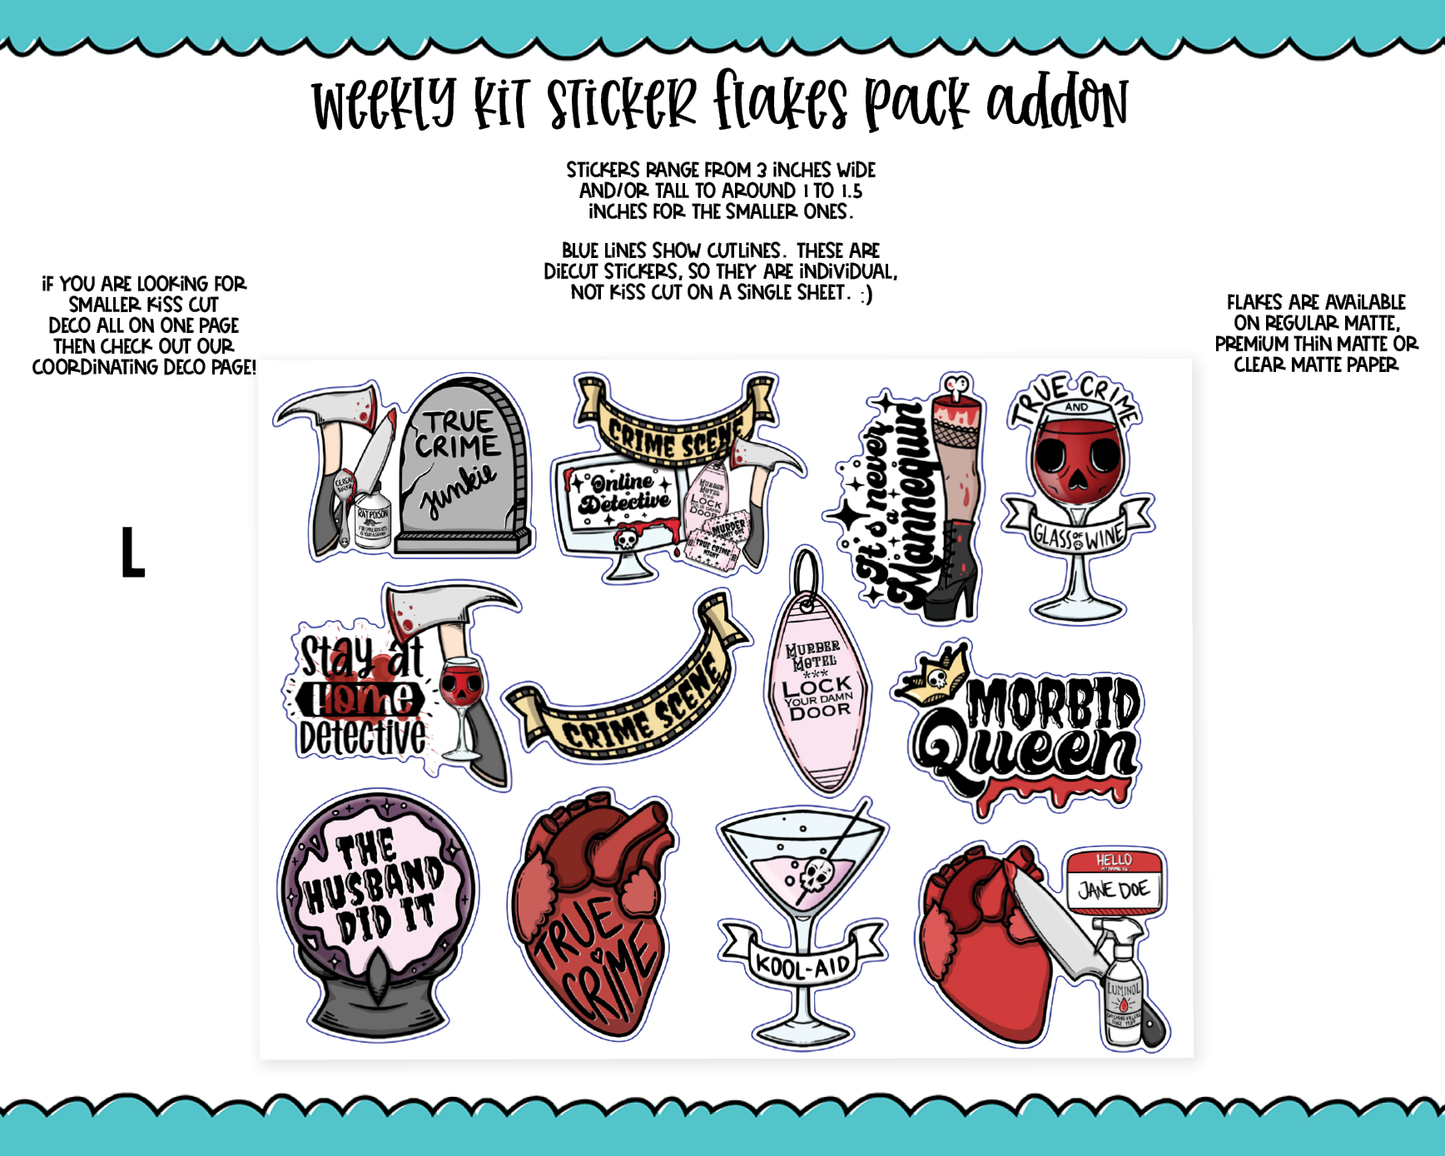 Stay at Home Detective True Crime Themed Weekly Kit Addons - All Sizes - Deco, Smears and More!